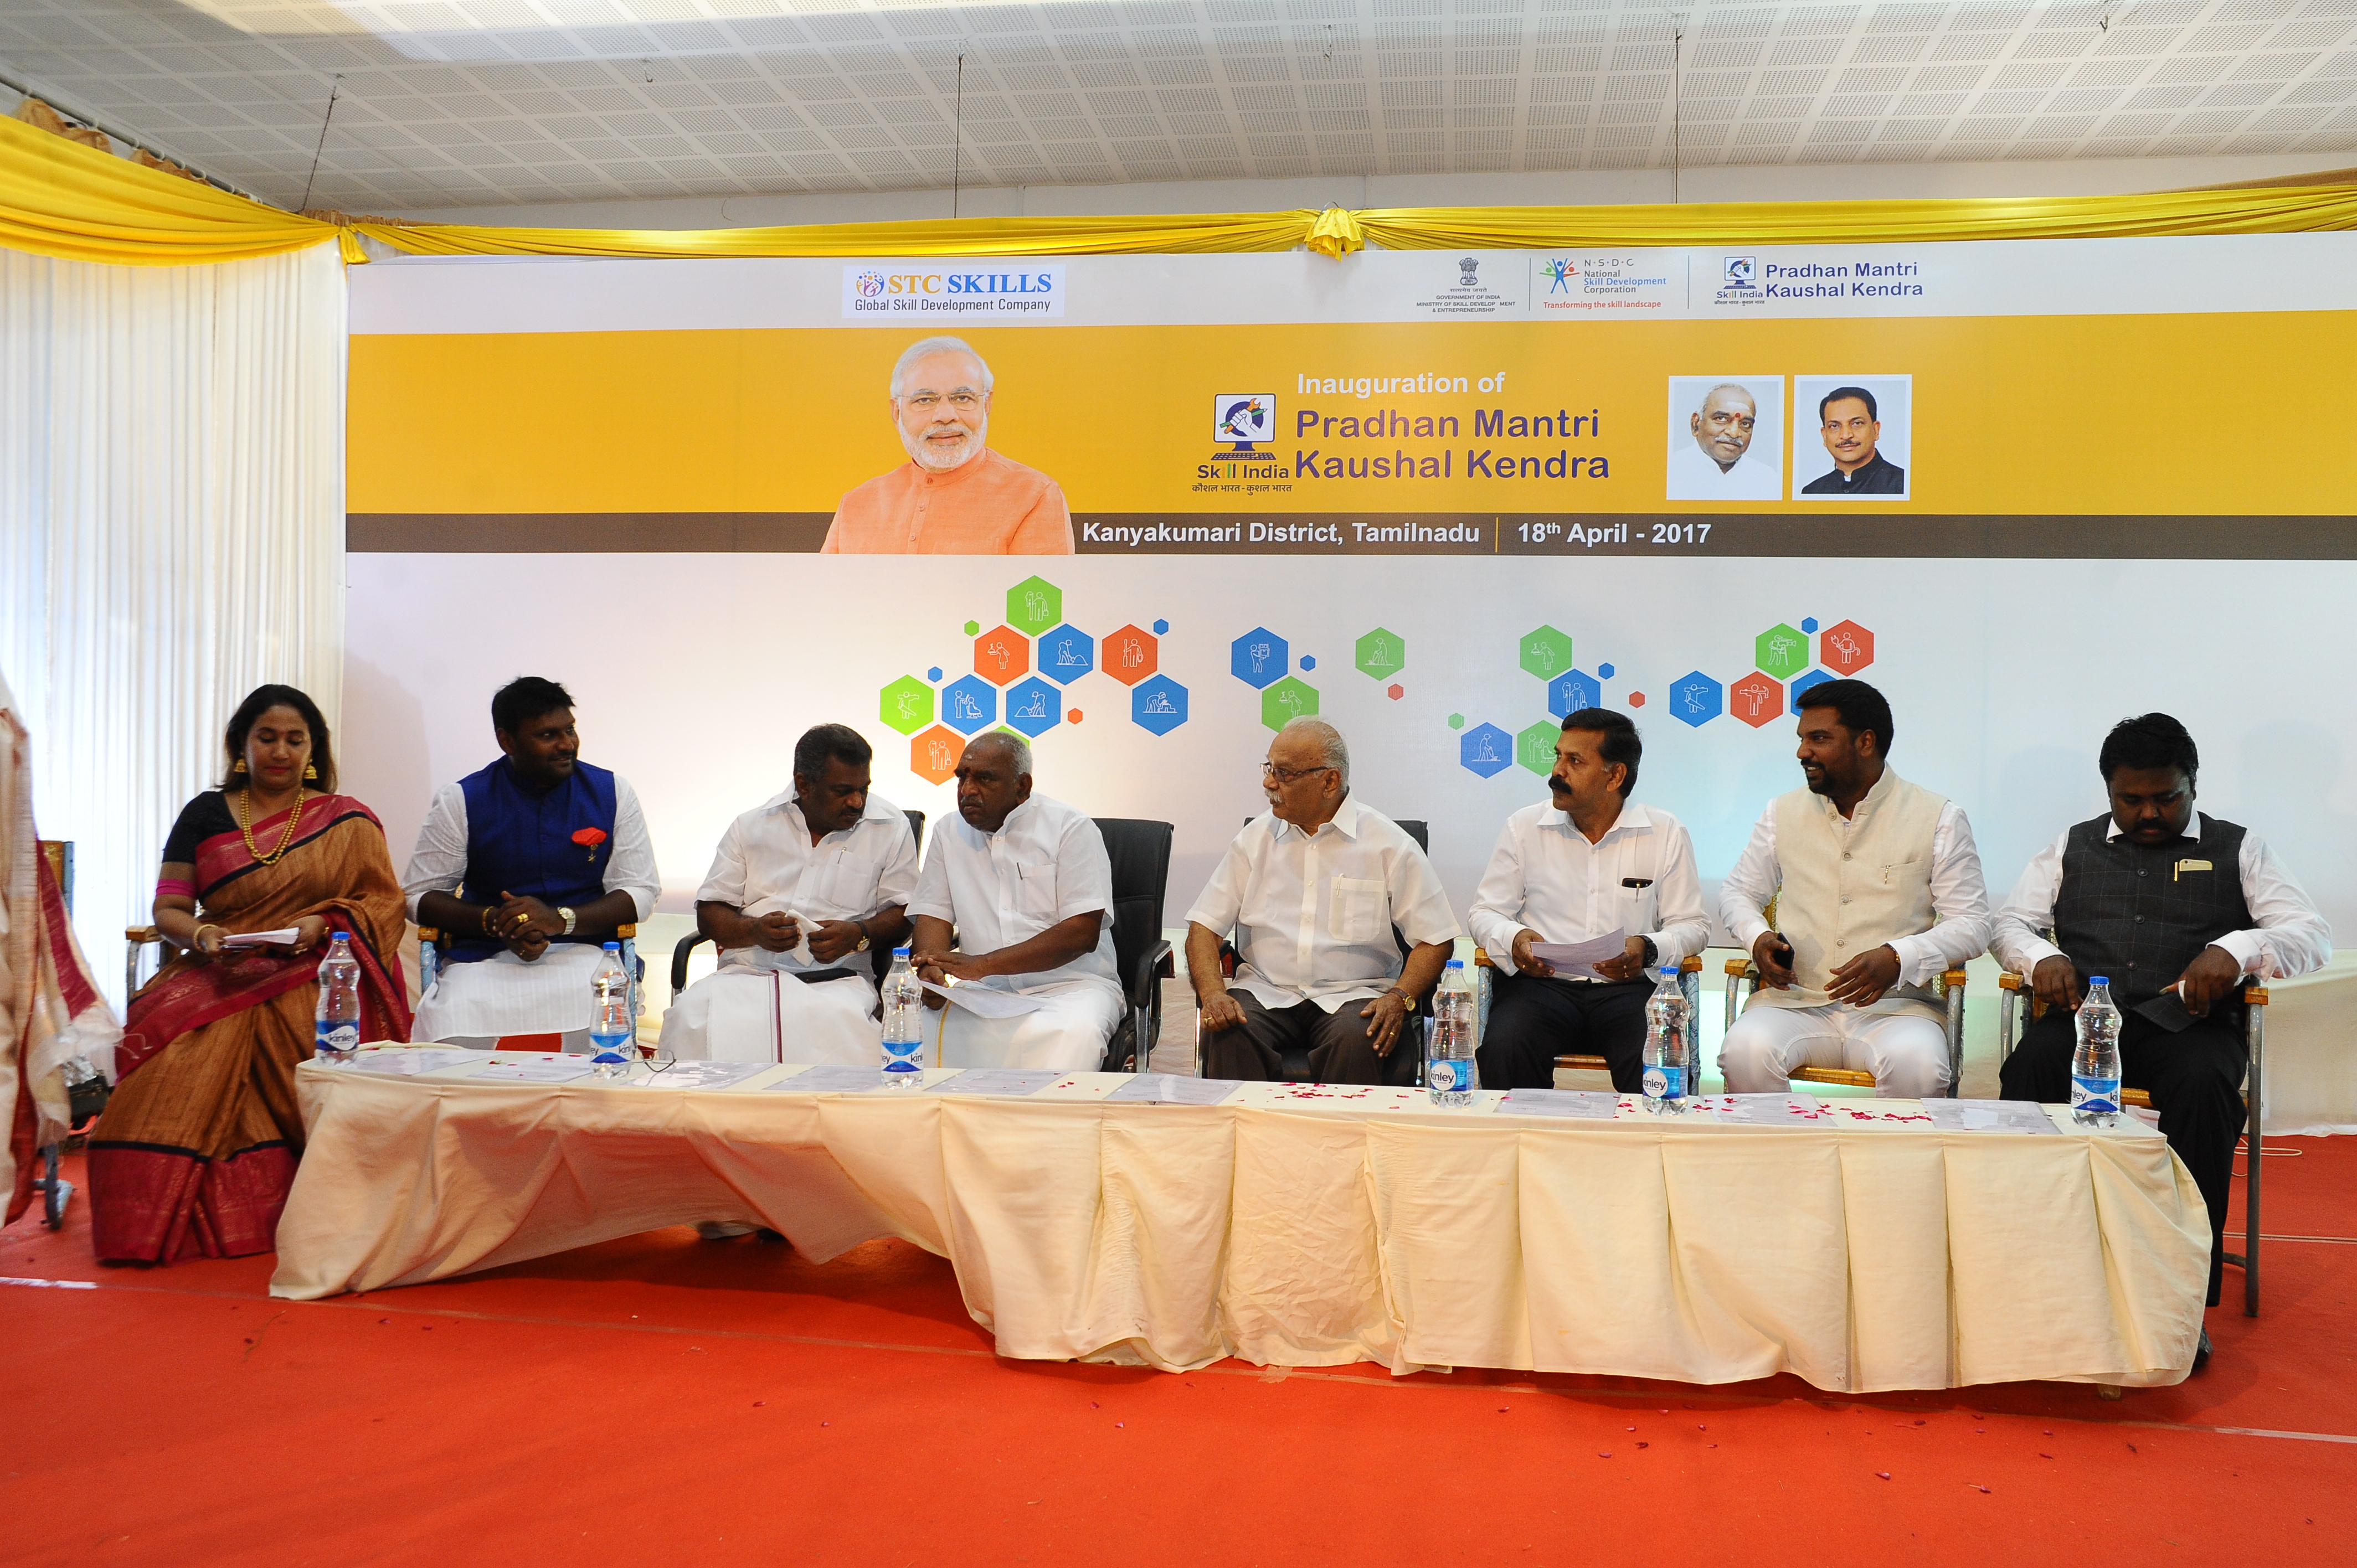 Blog Archive STC Skills launches its first PMKK center at Nagercoil, TamilNadu STC Skills picture